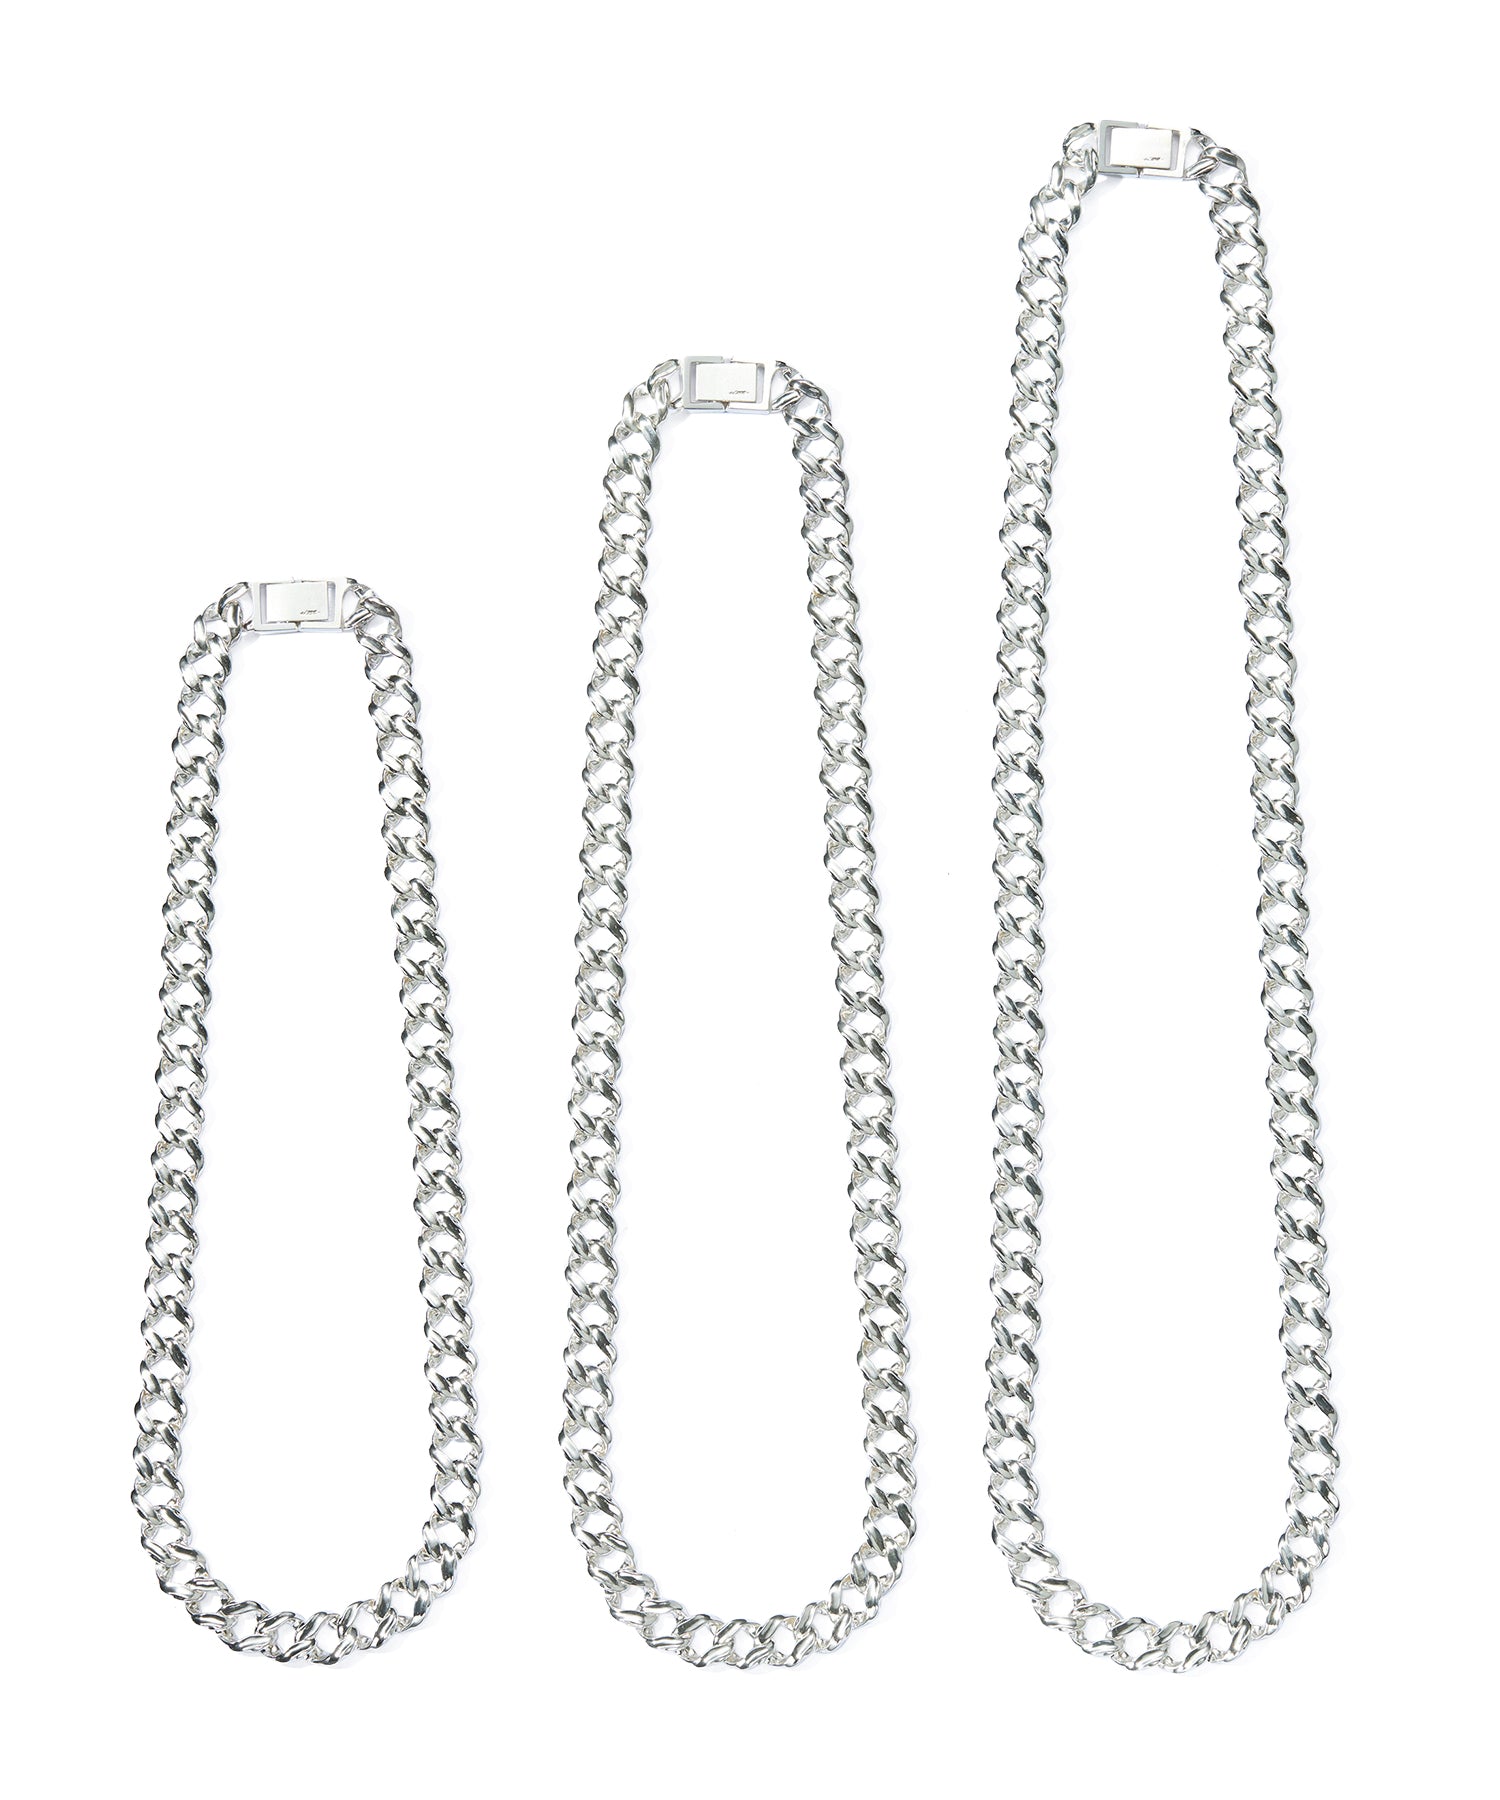 LINK CHAIN SKIN SILVER NECKLACE SHORT